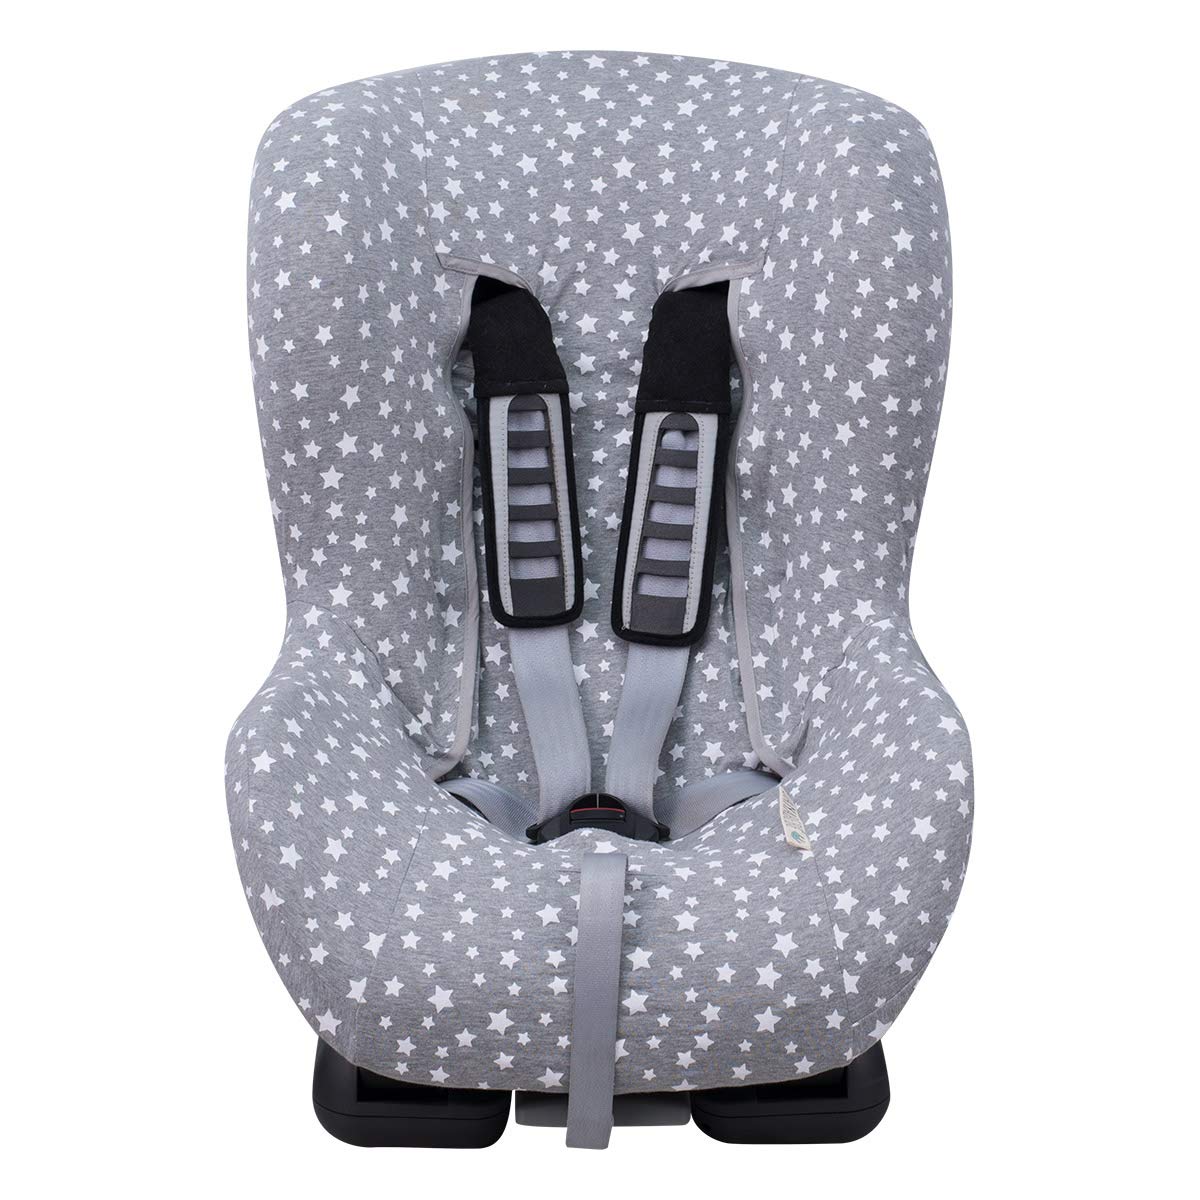 JYOKO Kids Cover Liner Universal for Car seat Compatible with Britax, Chicco, Mico (Without Head Support) (White Star)